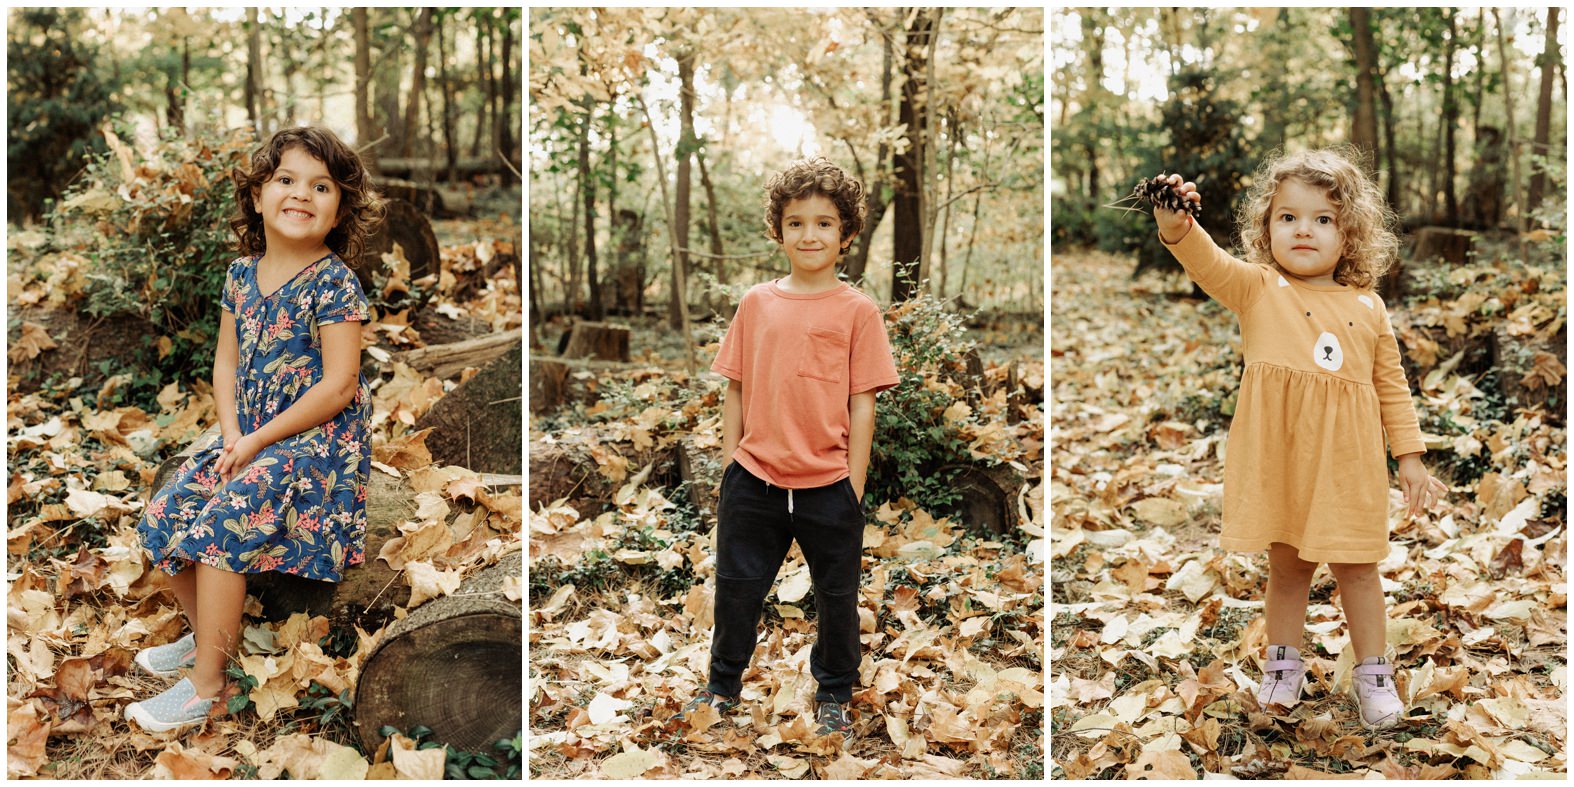 Adam Lowe photography, family session, outdoor, love, kids, jeffery mansion, fine art, editorial